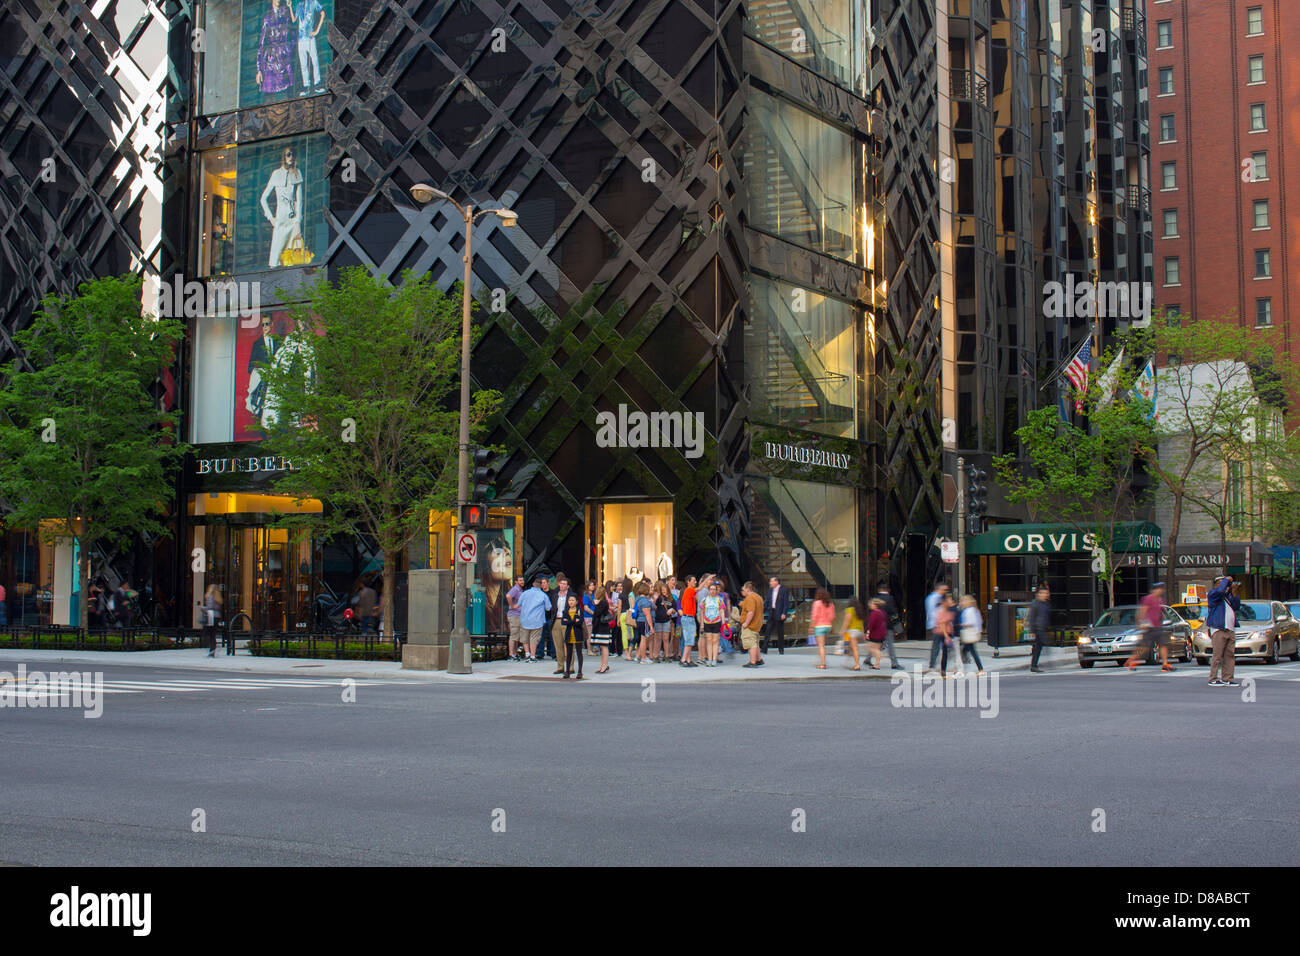 shoppers at the base of the burberry store building in downtown chicago on  michigan avenue during spring season shoppers Stock Photo - Alamy